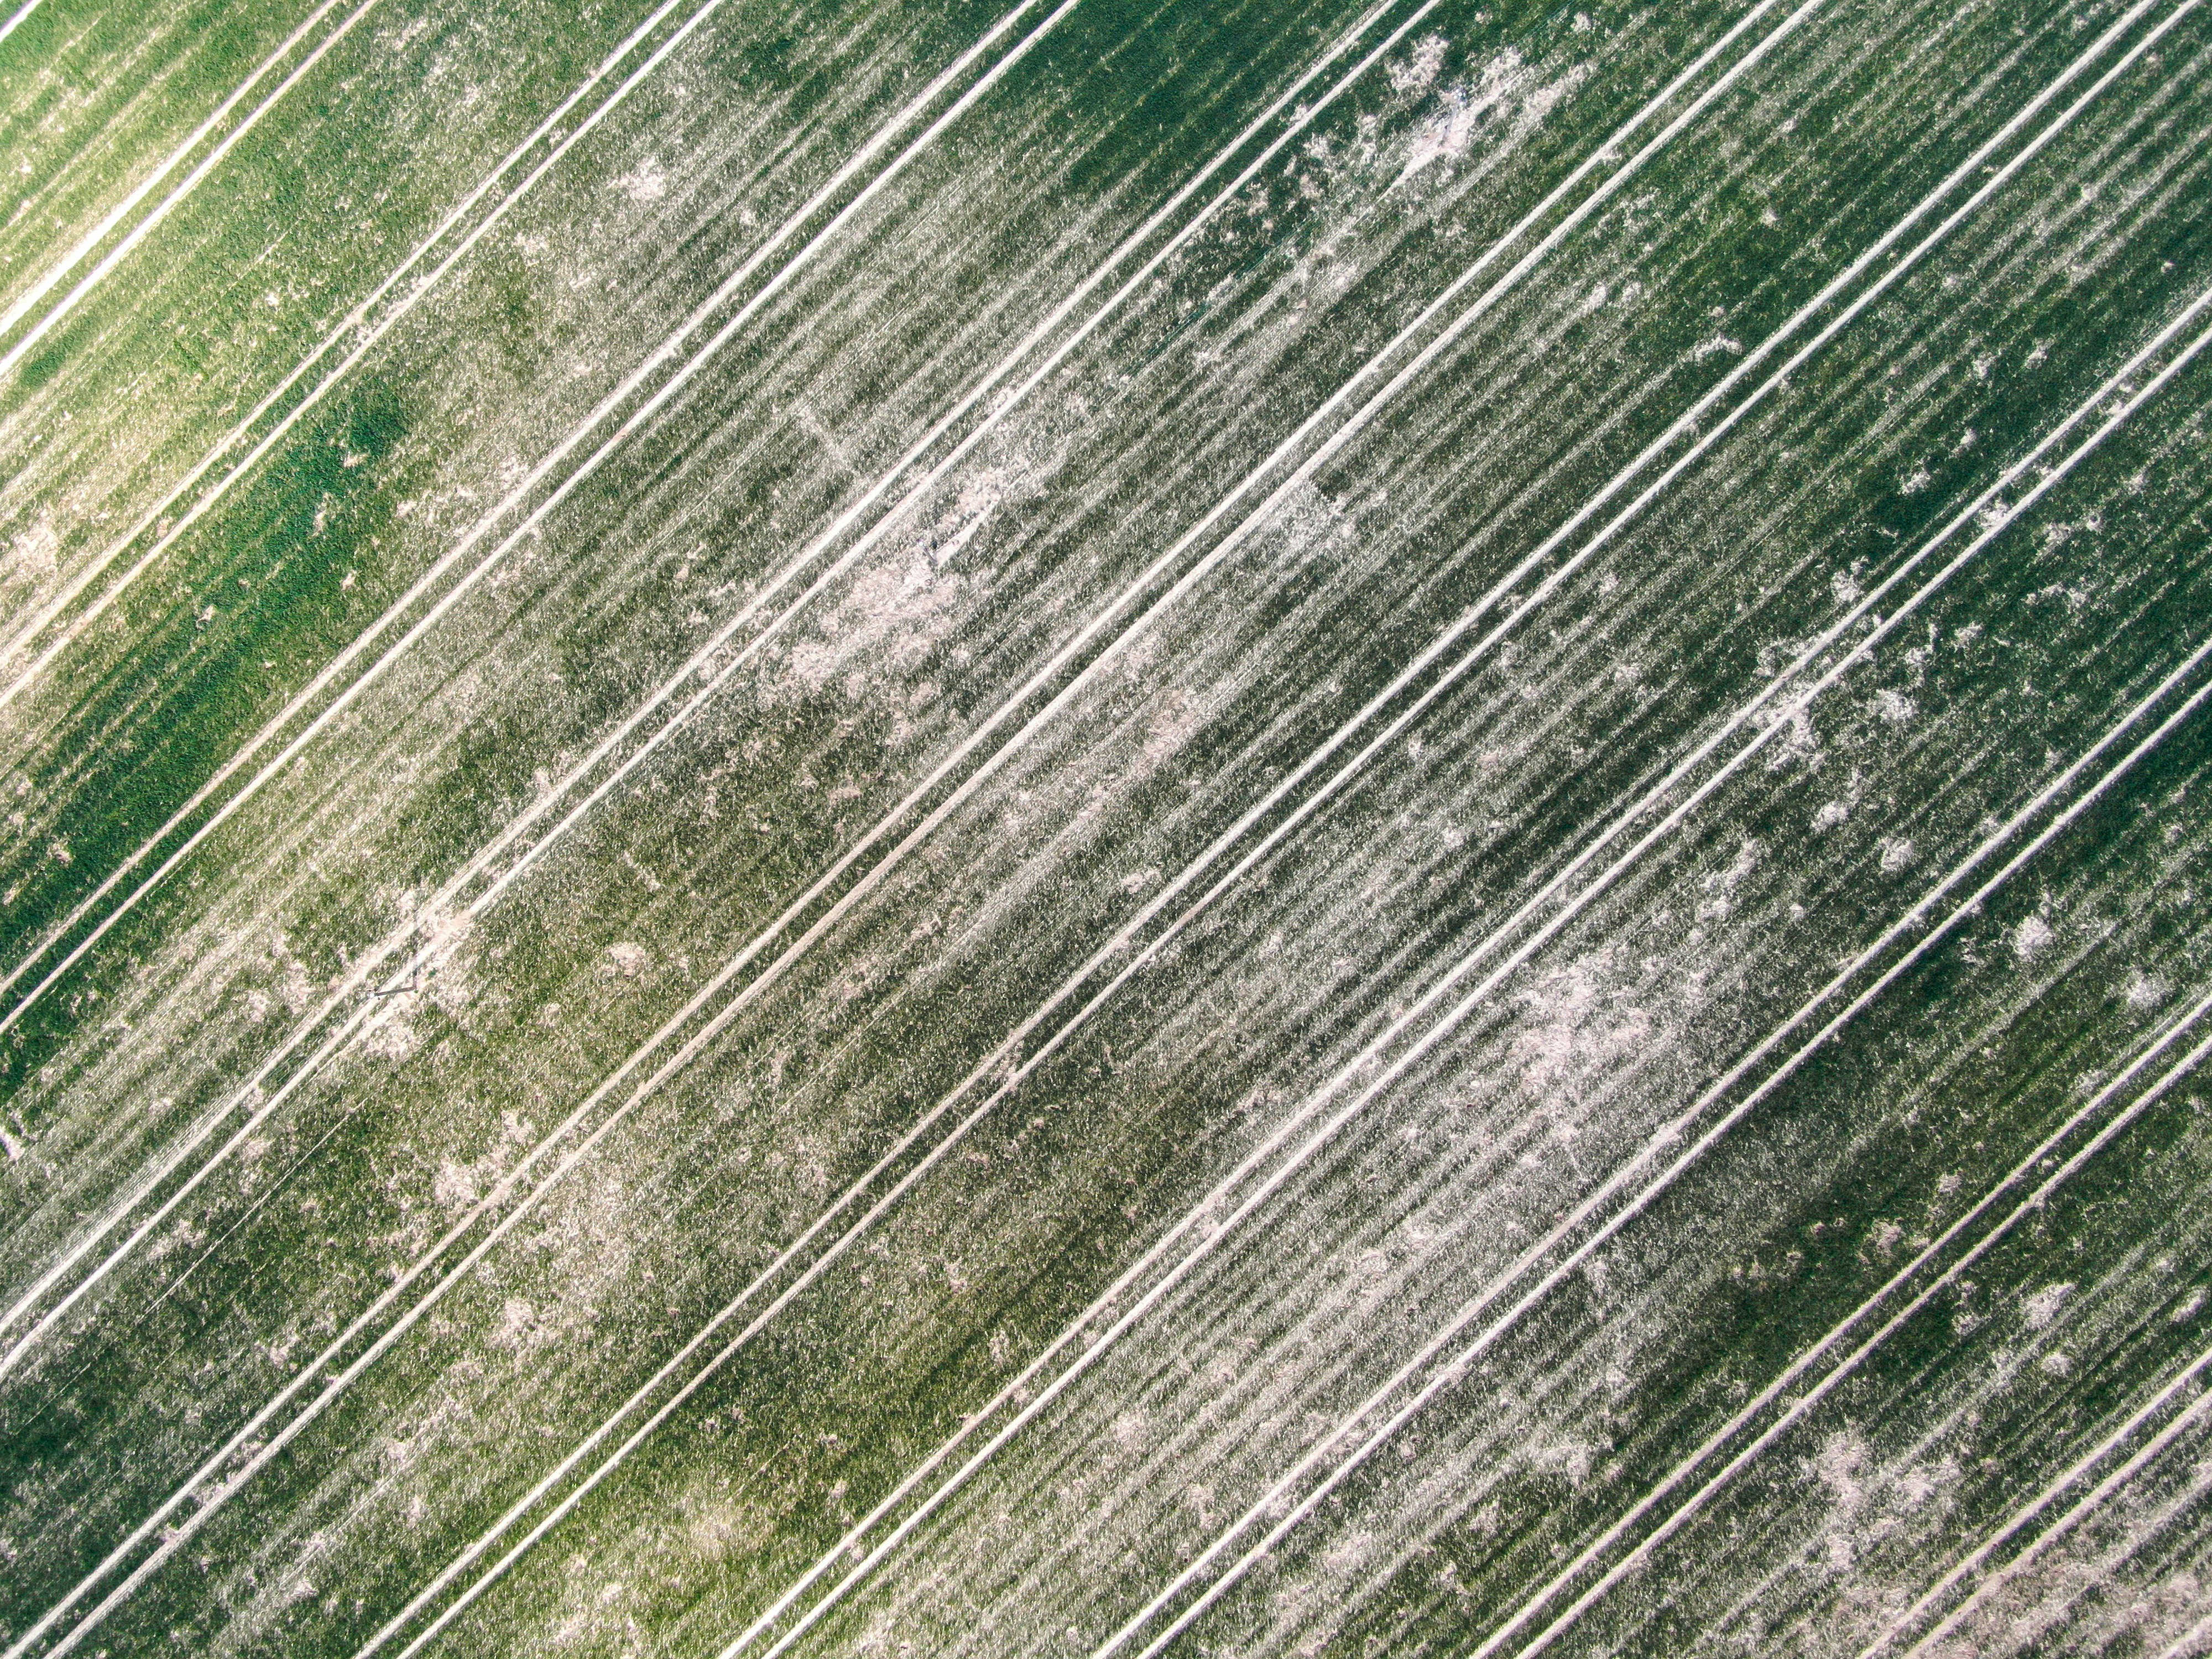 green and white wooden surface